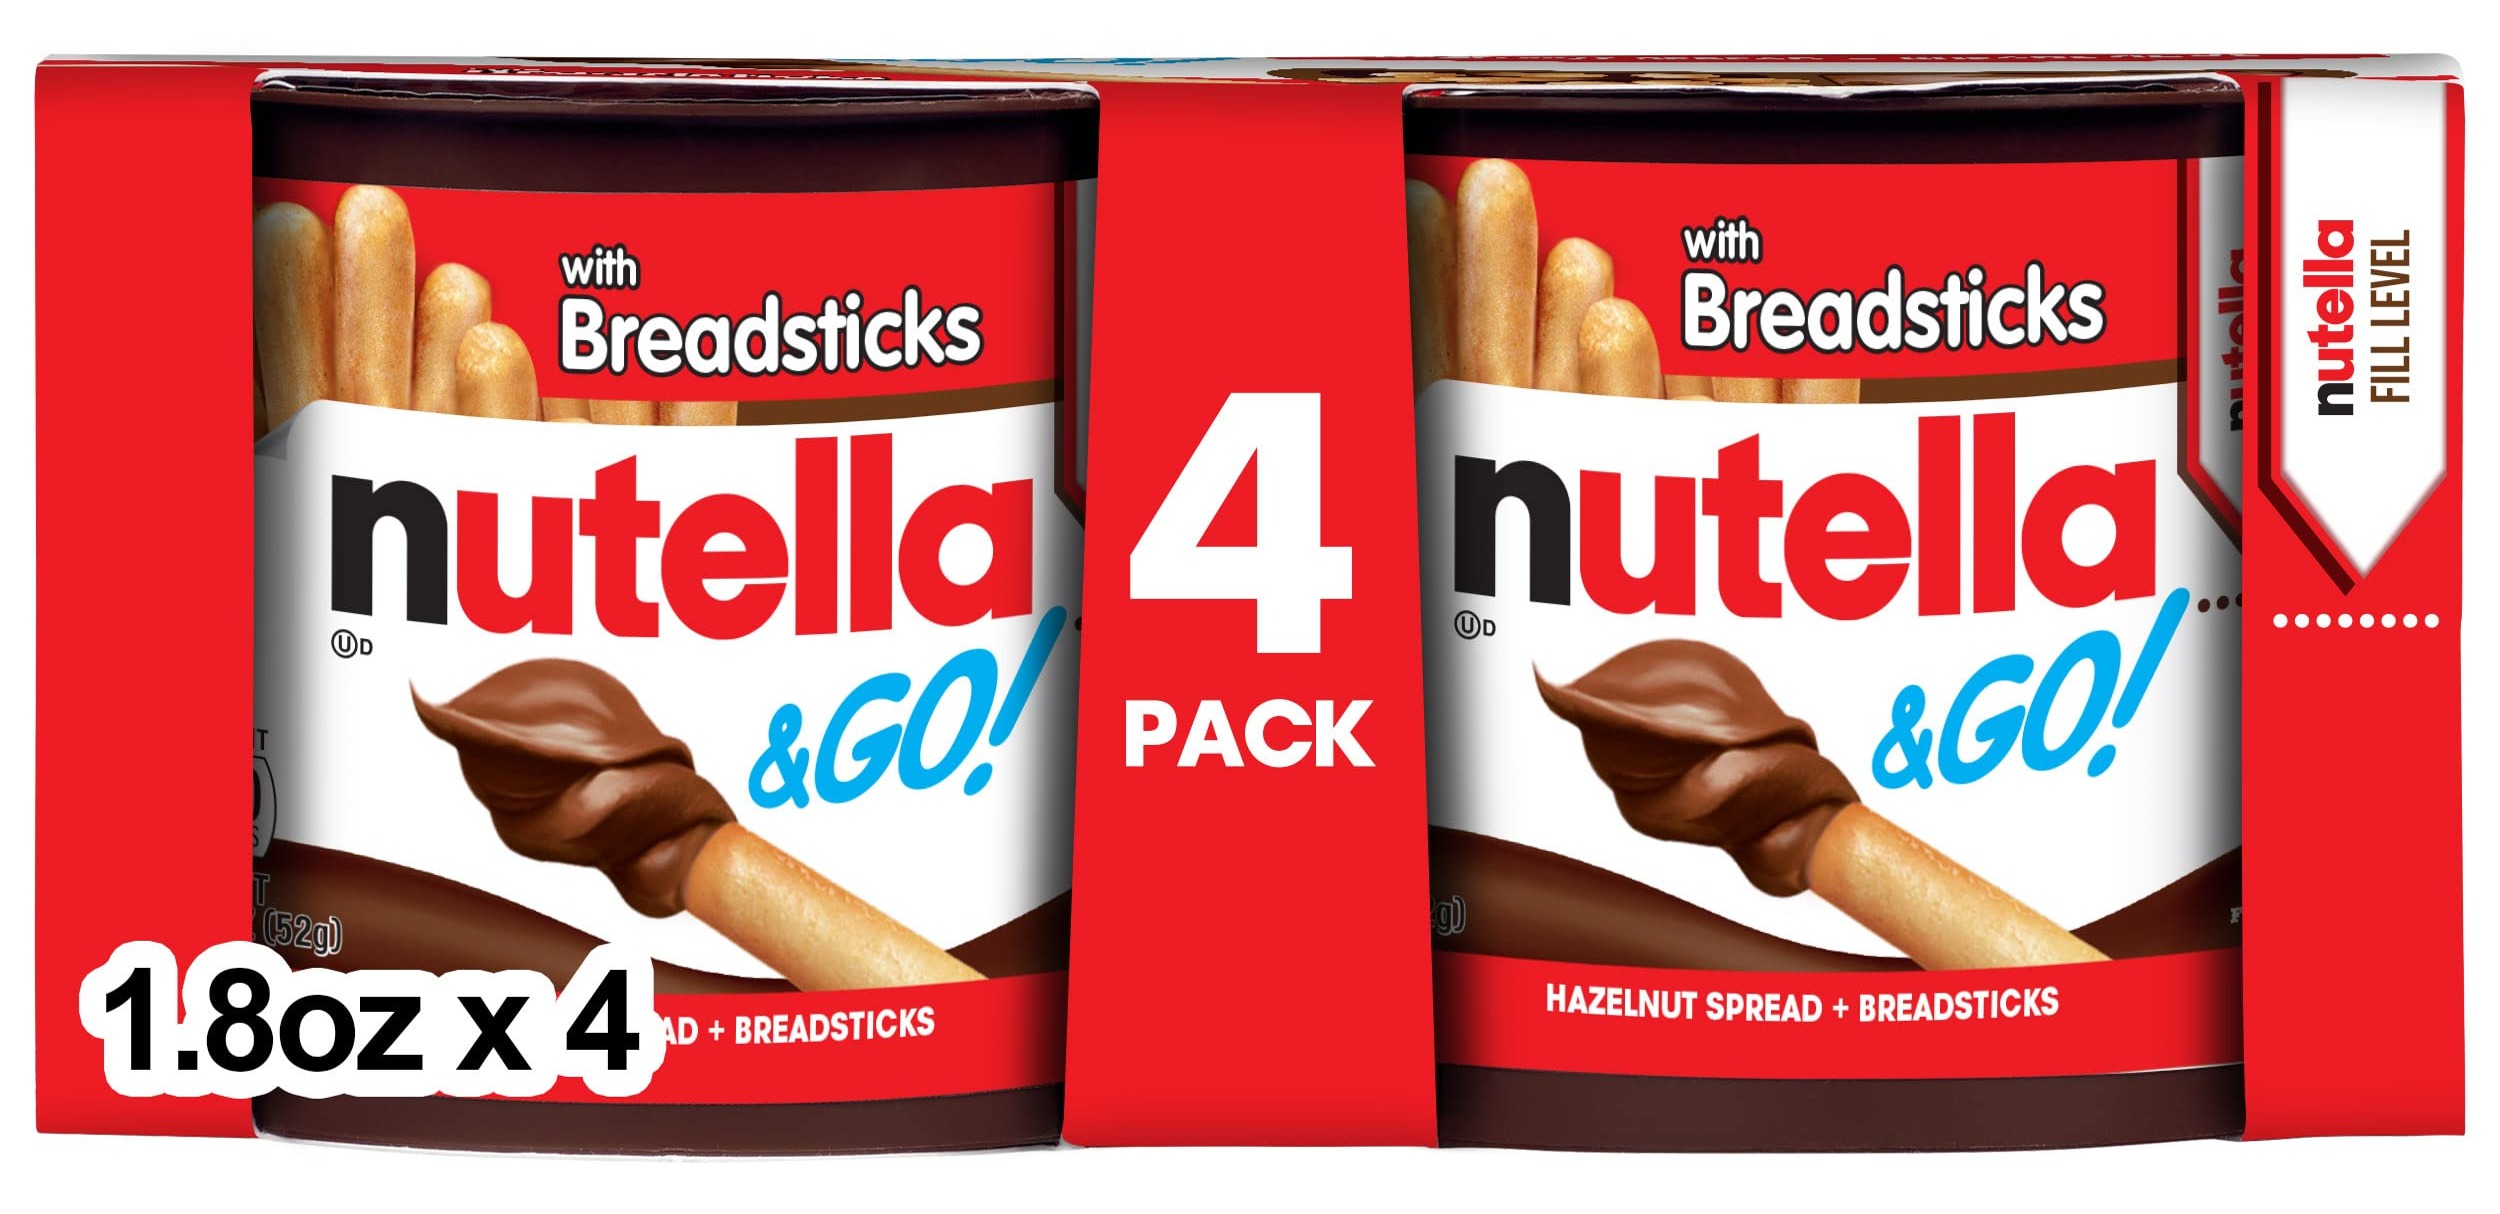 [S&S] $3.57: Nutella & GO! 4 Pack, 1.9 Oz Each